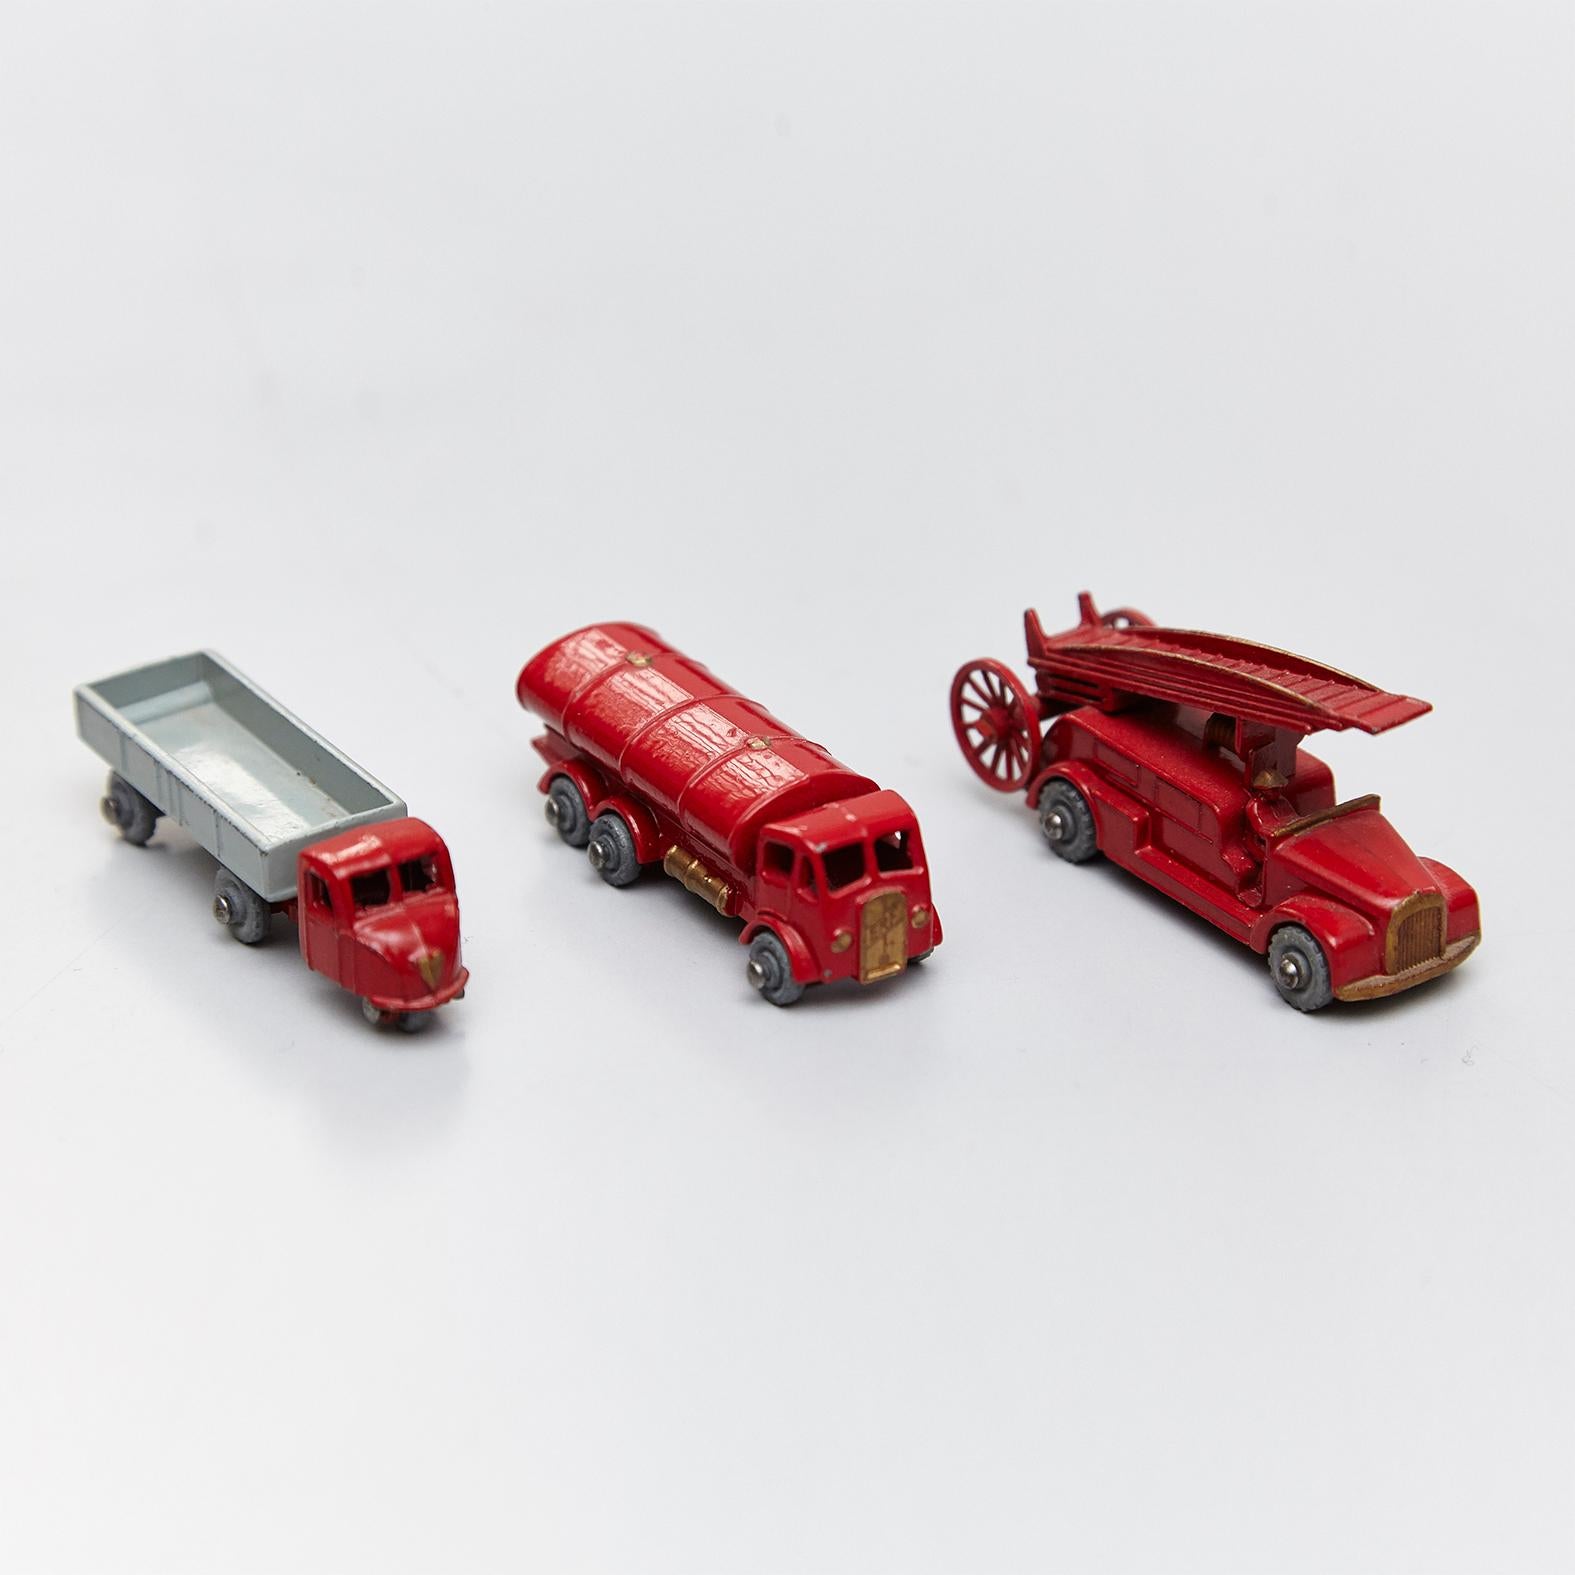 Three Red Fire Trucksfrom Lesney Matchboxes Series, circa 1950.

Lesney Products & Co. Ltd. was a British manufacturing company responsible for the conception, manufacture, and distribution of die-cast toys under the 